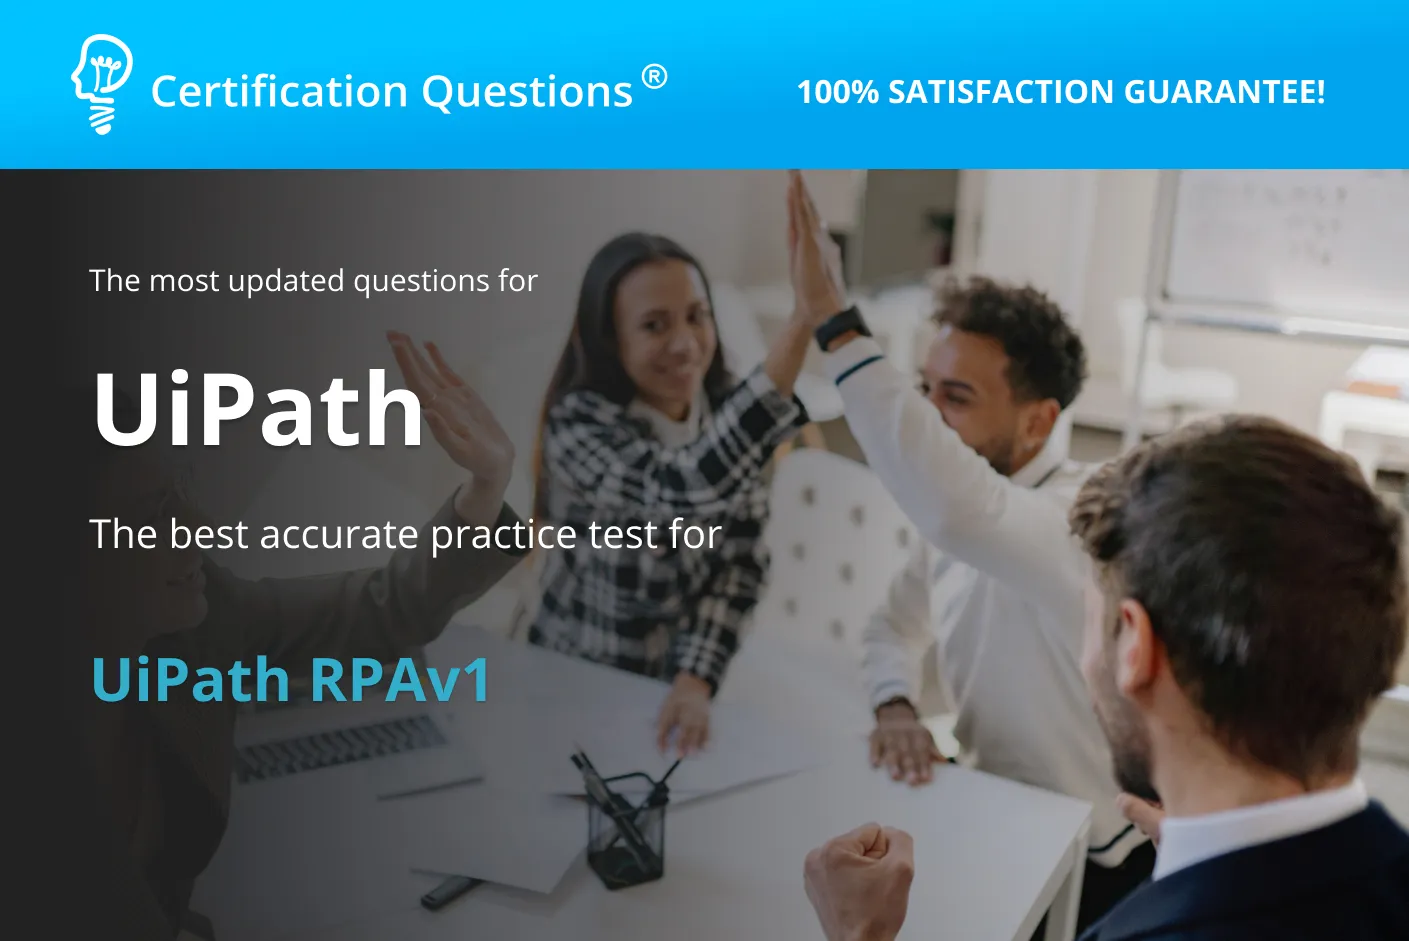 This image represents the uipath rpa associate certification exam practice questions